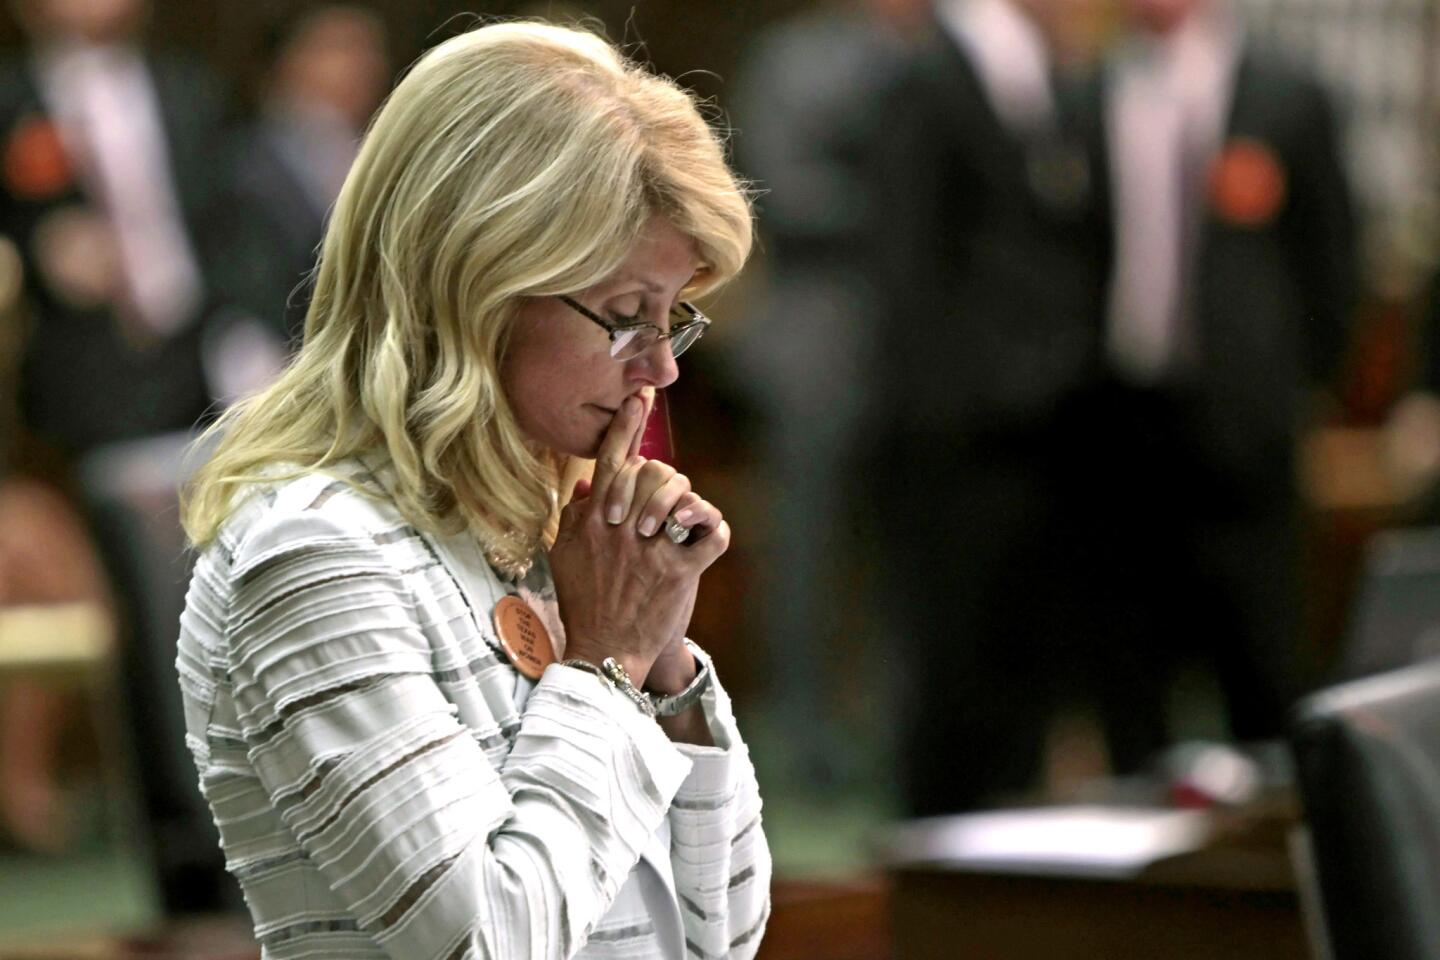 Texas state Sen. Wendy Davis (D-Fort Worth) was still standing after her 13-hour filibuster and the blocking of a vote on Republicans' antiabortion bill before midnight Tuesday.